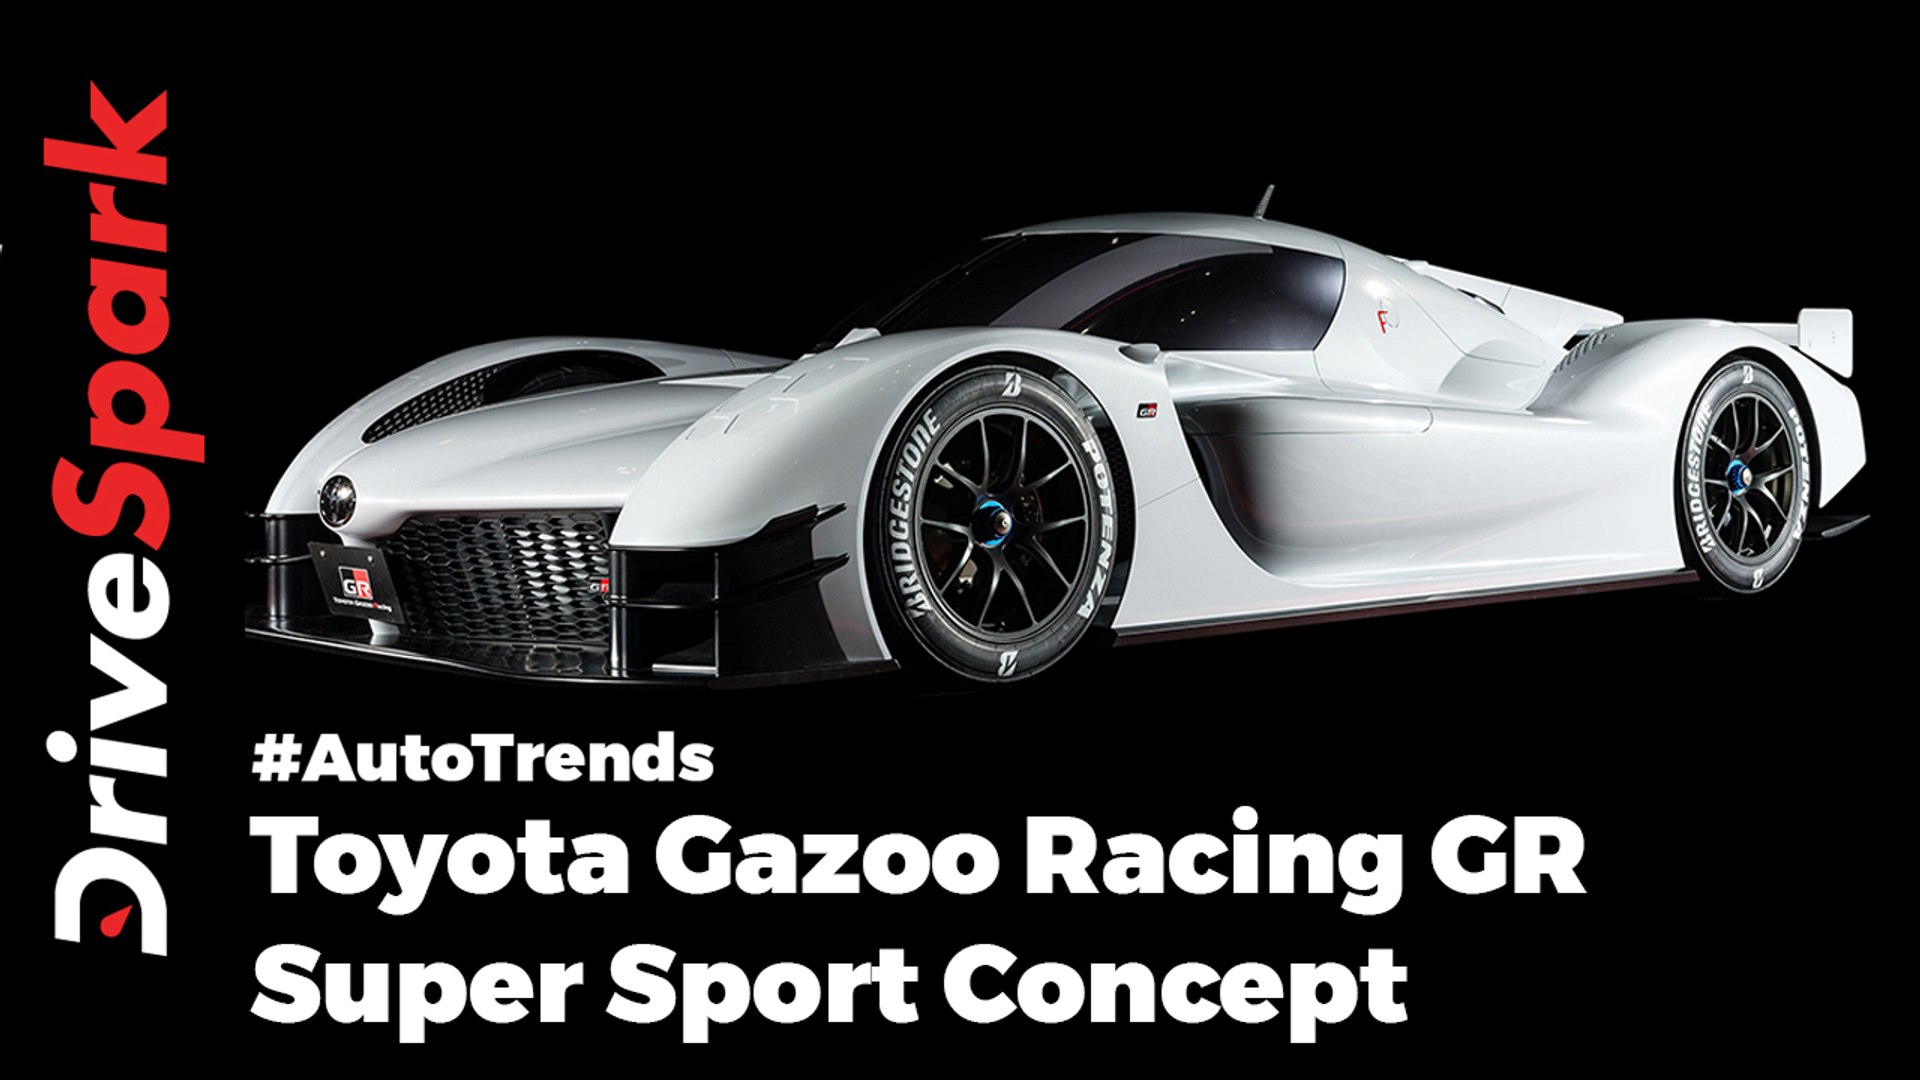 Toyota Gazoo Racing Gr Super Sport Concept Revealed Video Dailymotion